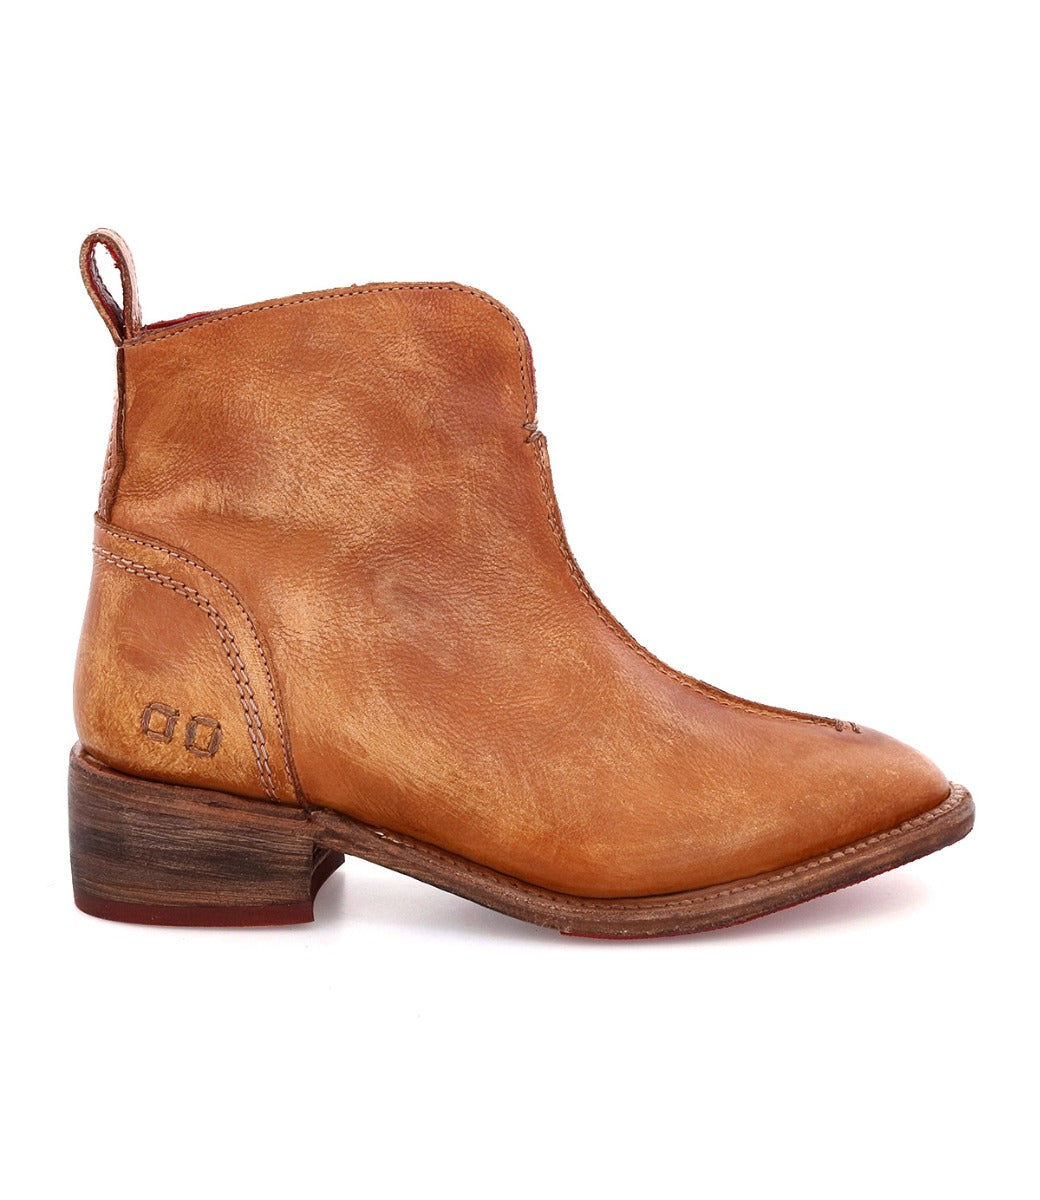 A Tabitha leather ankle boot with a wooden heel by Bed Stu.